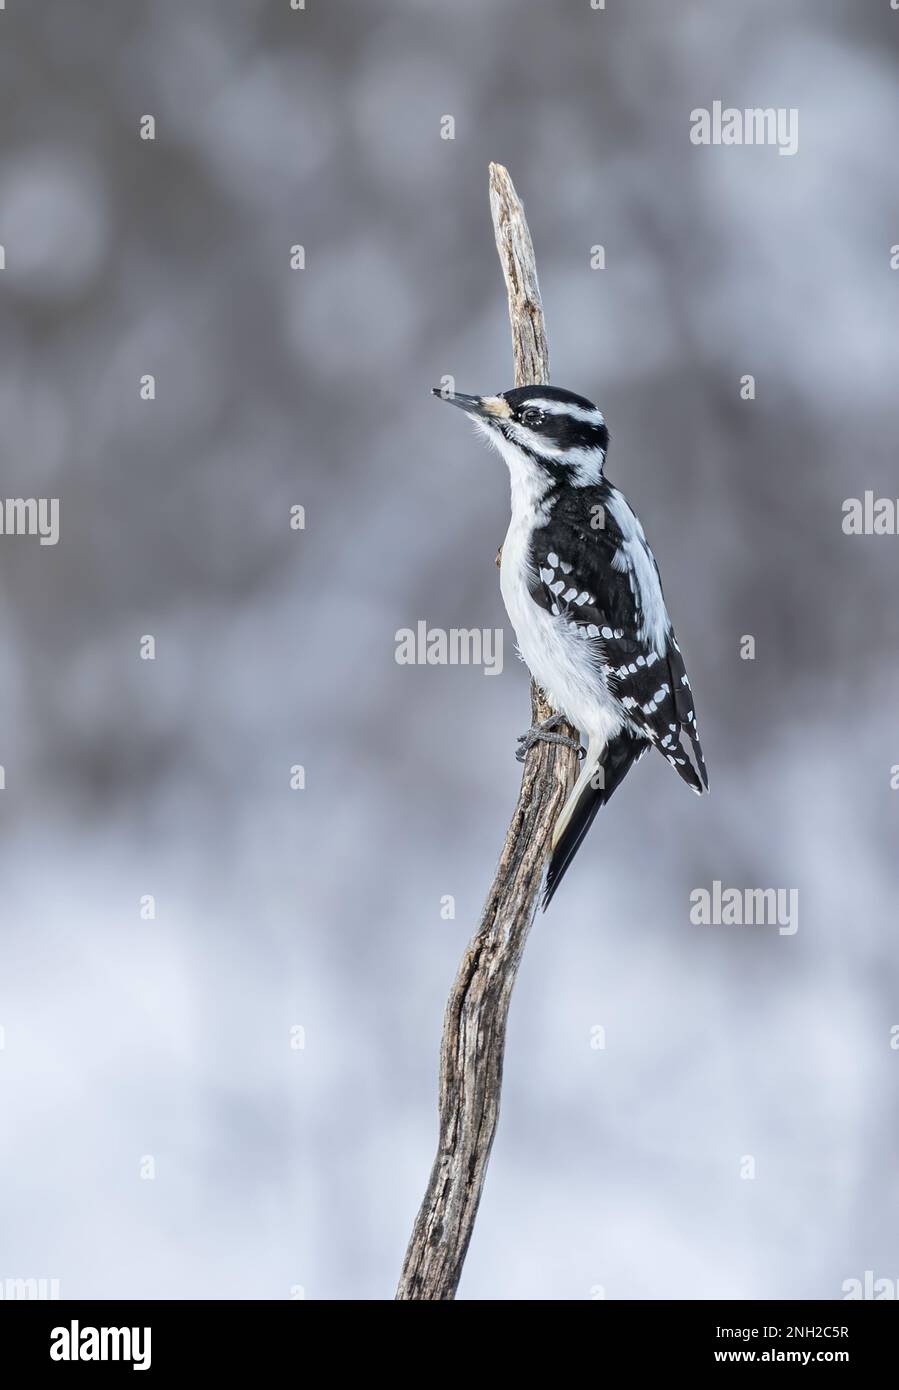 Female Downy woodpecker perched on a branch in winter in Ottawa, Canada Stock Photo